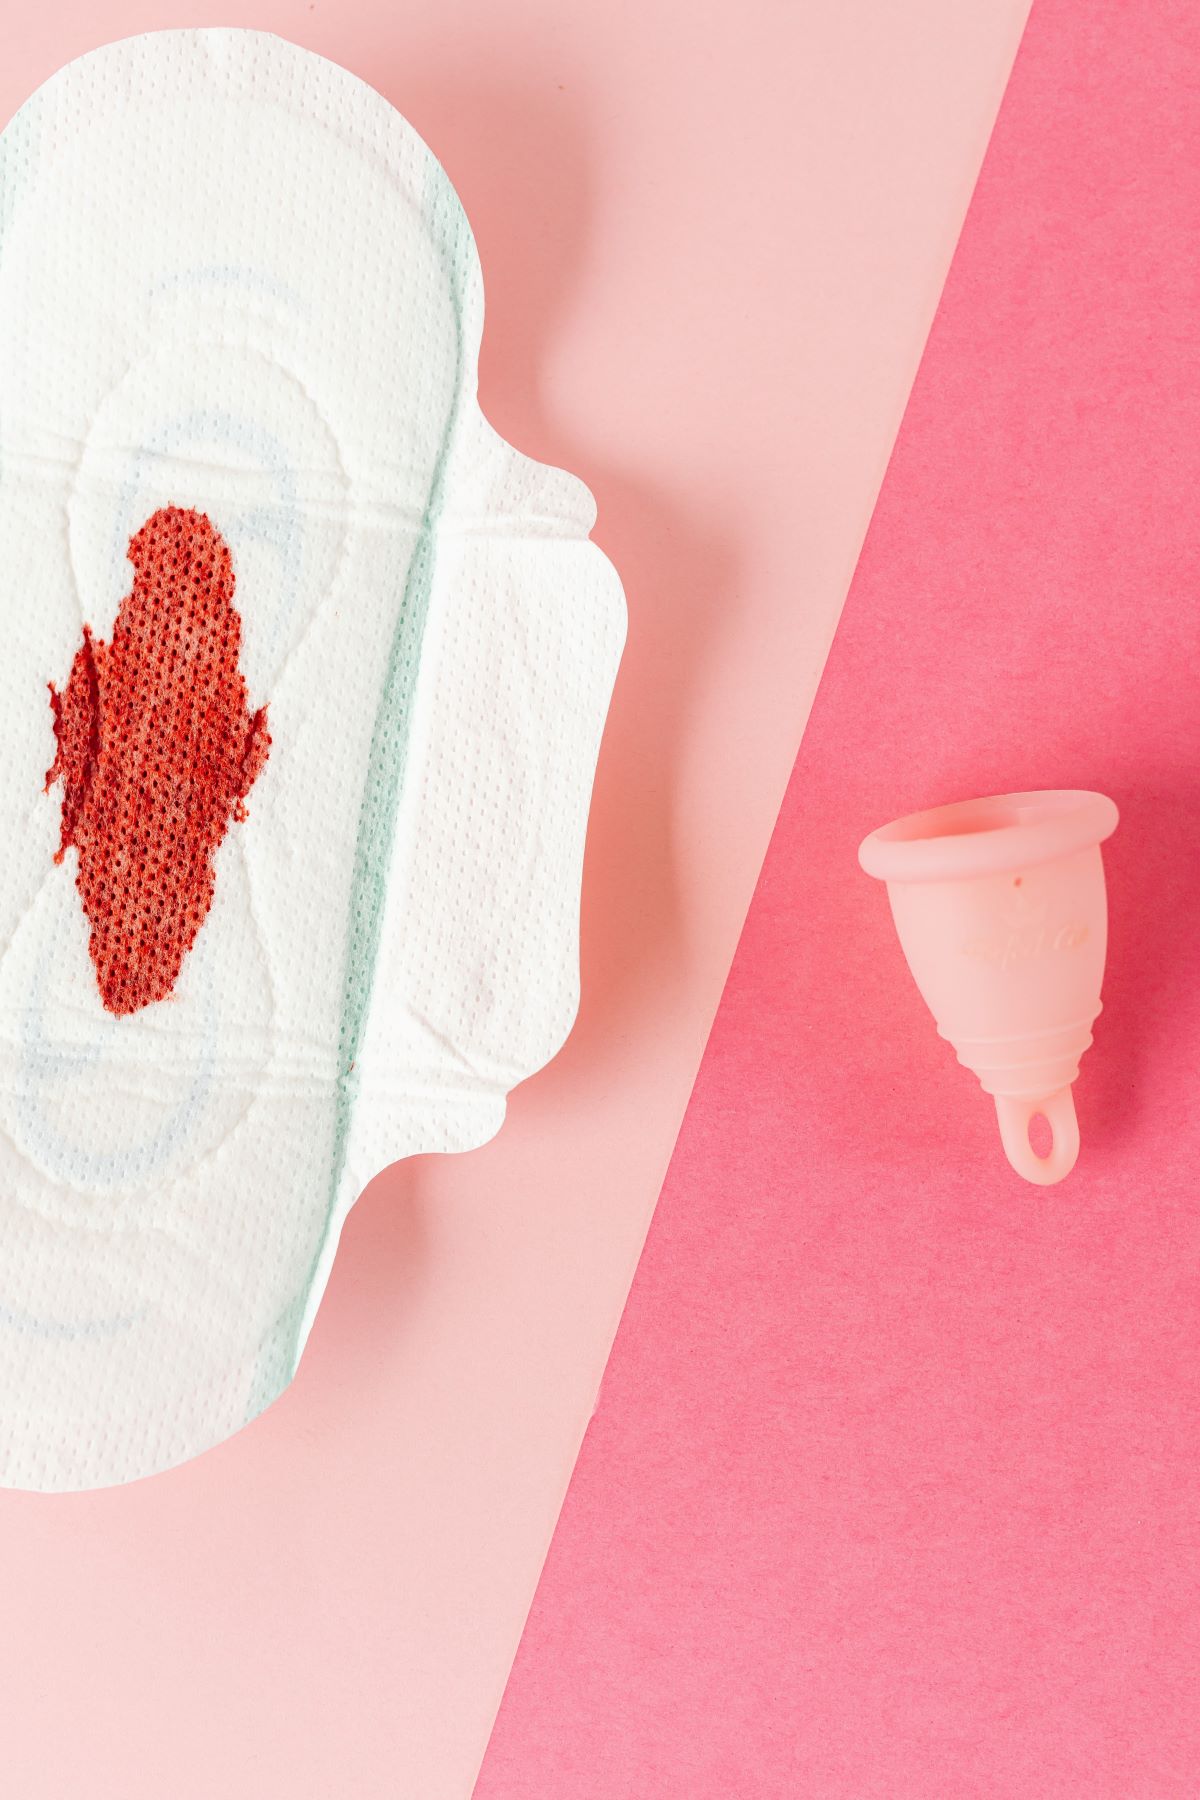 The Menstrual Cup Insert Guide To Make Period Care Simple &Amp; Hassle Free